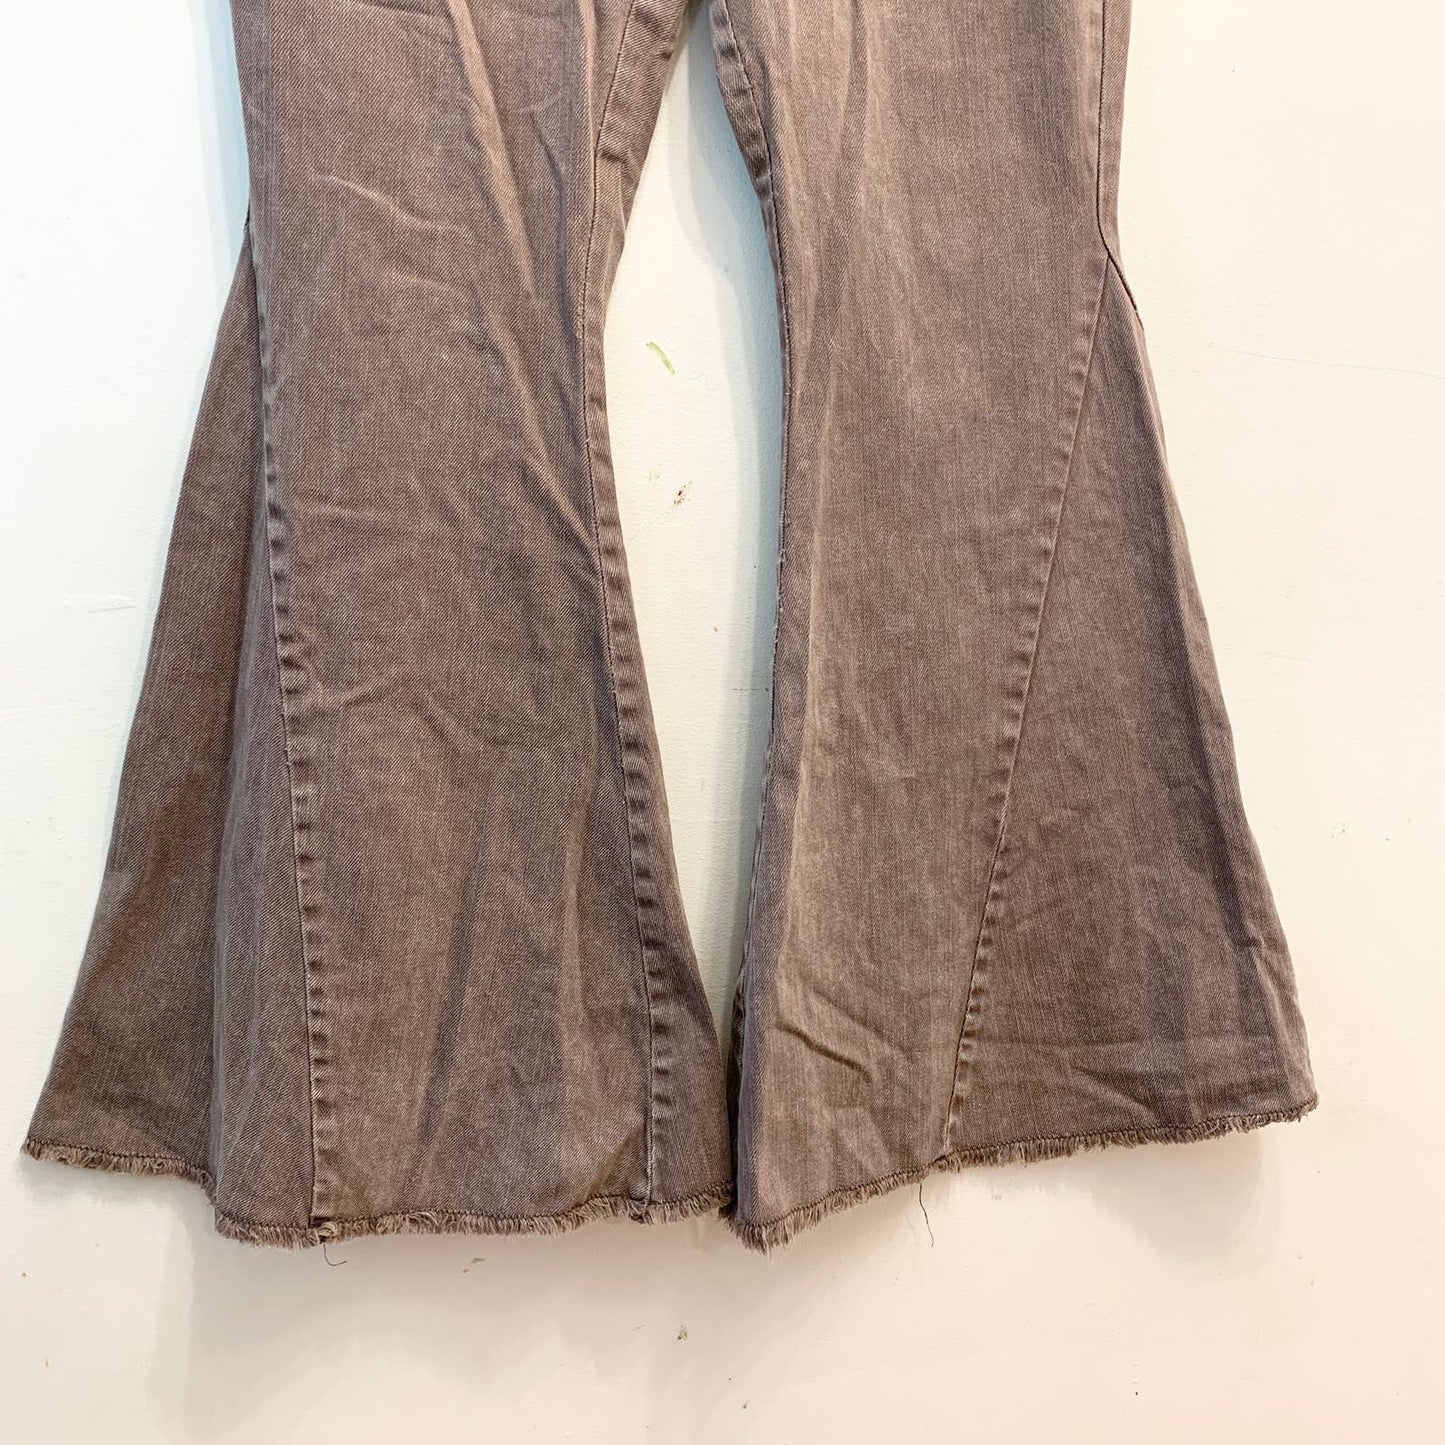 Versona High 70s Flare Bell Jeans Brown Ash Sz 10